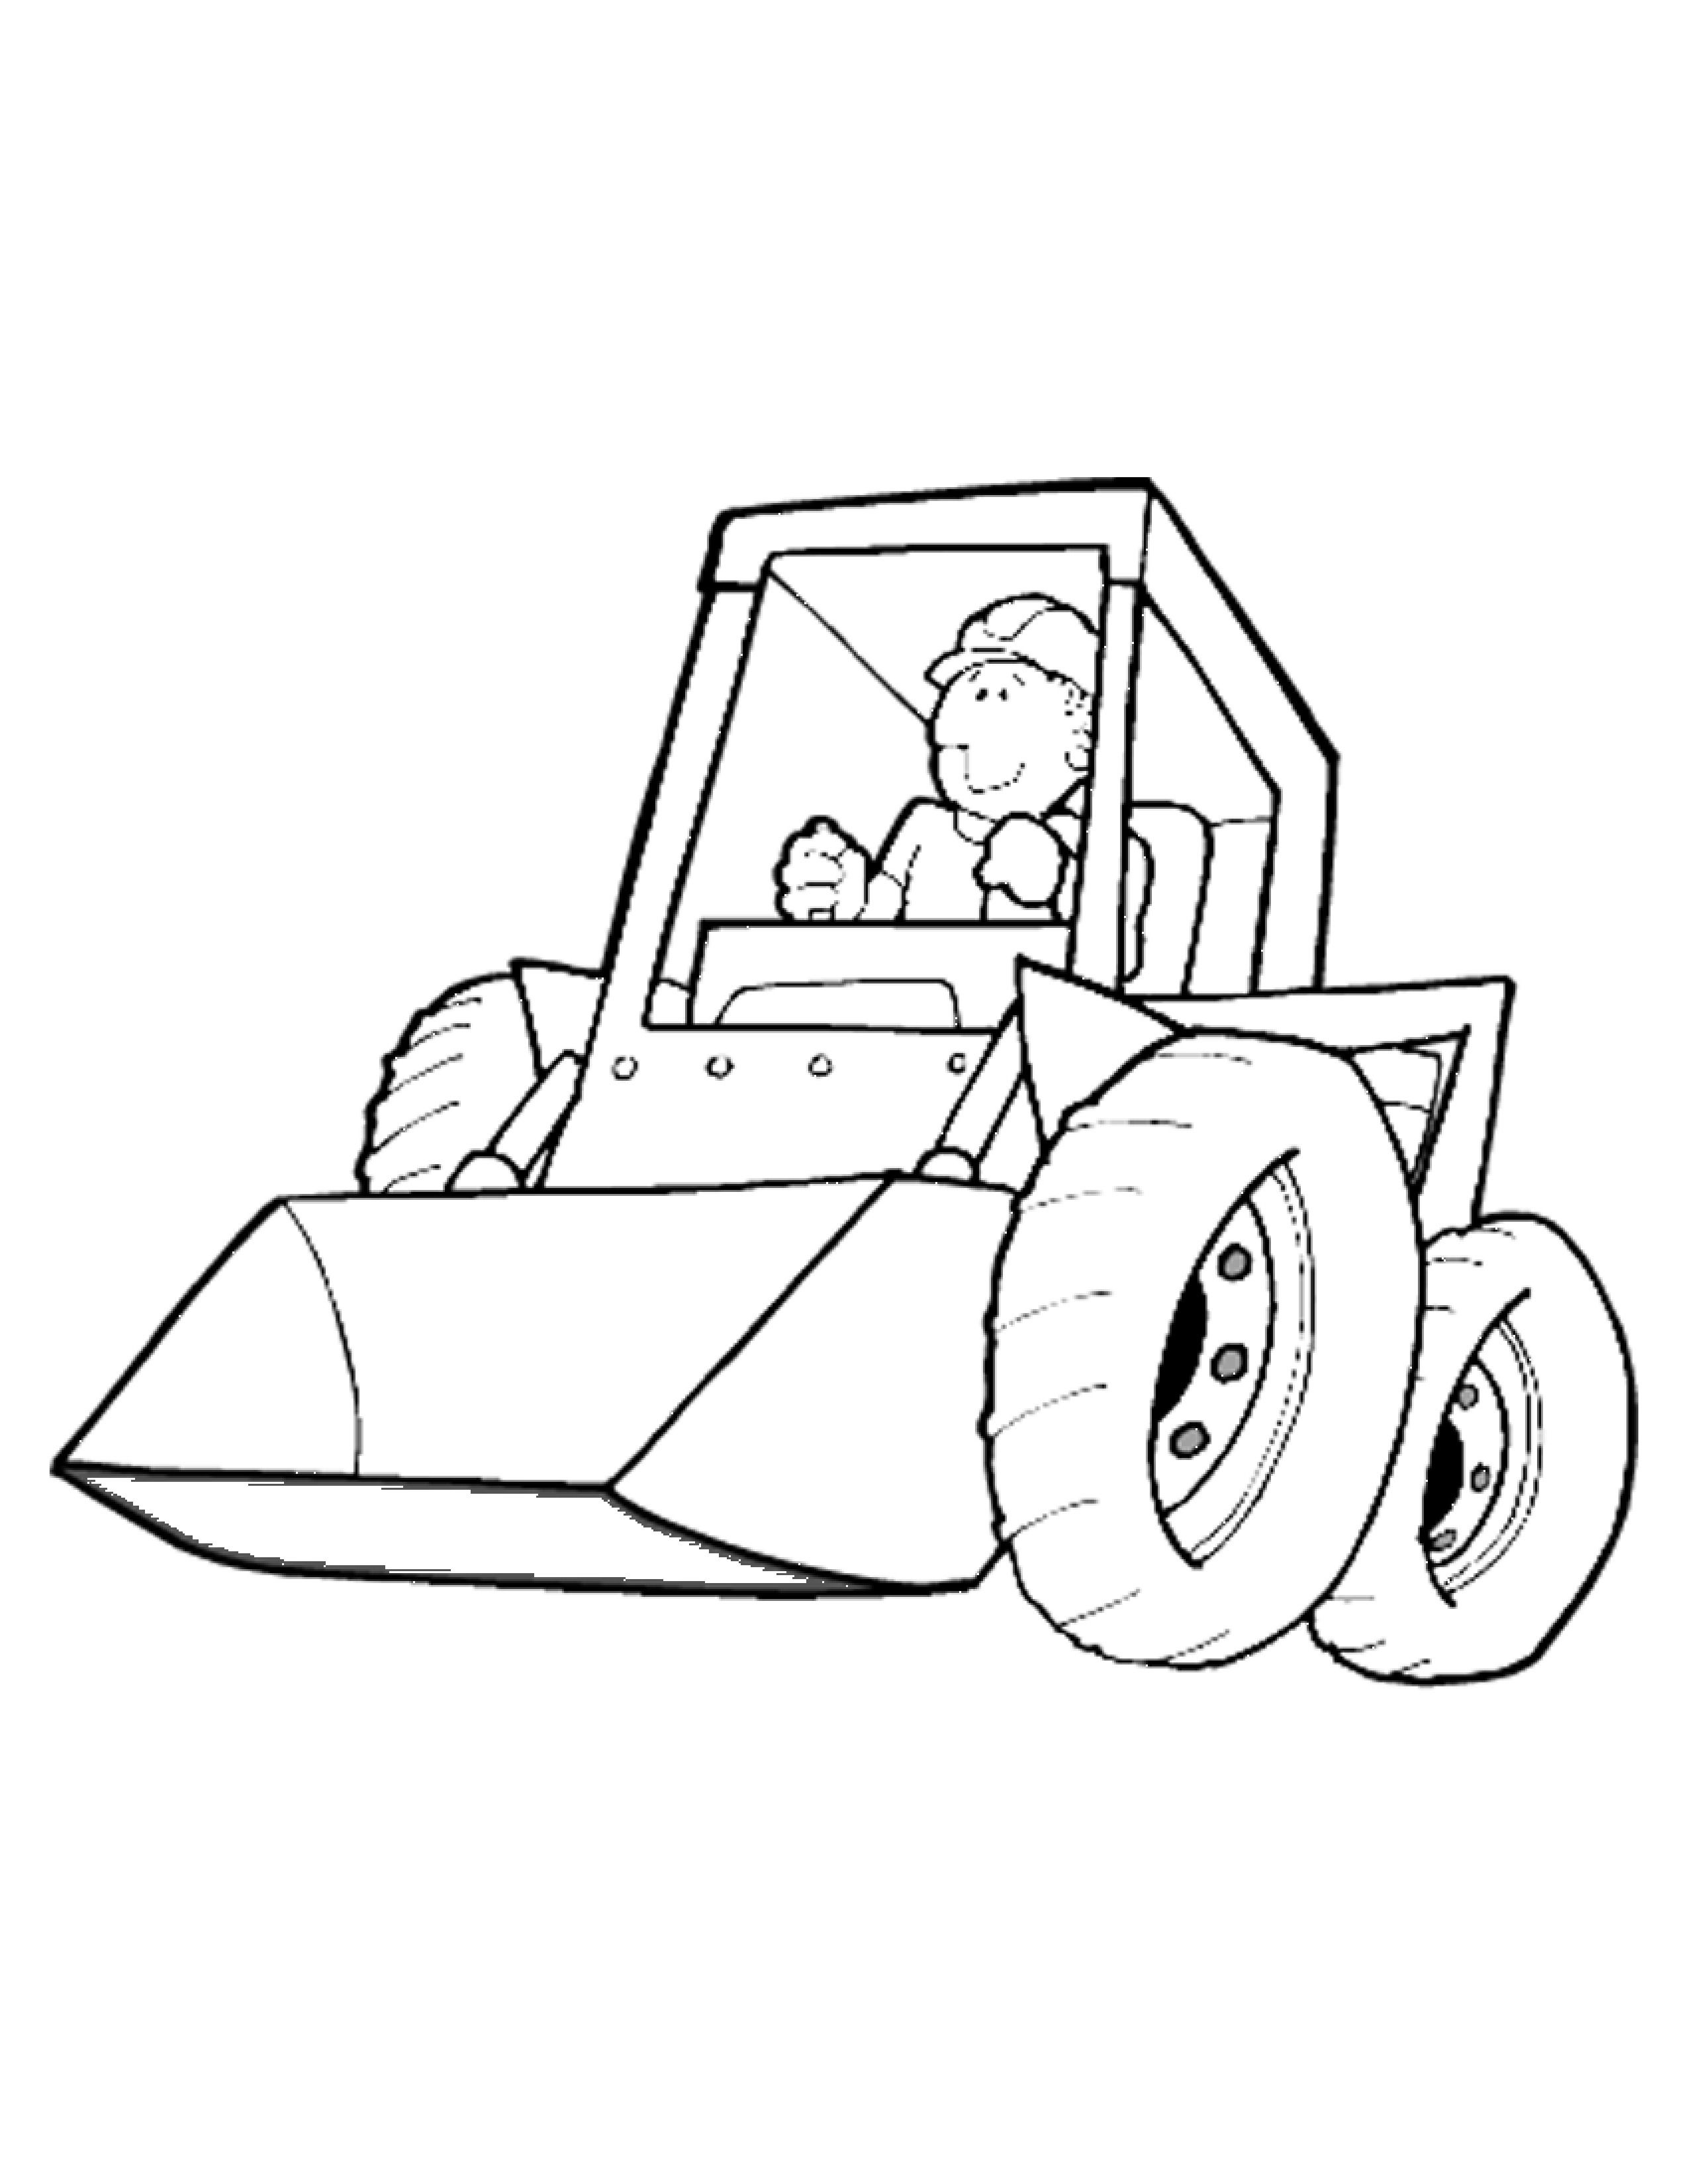  Construction Machinery Coloring Pages 